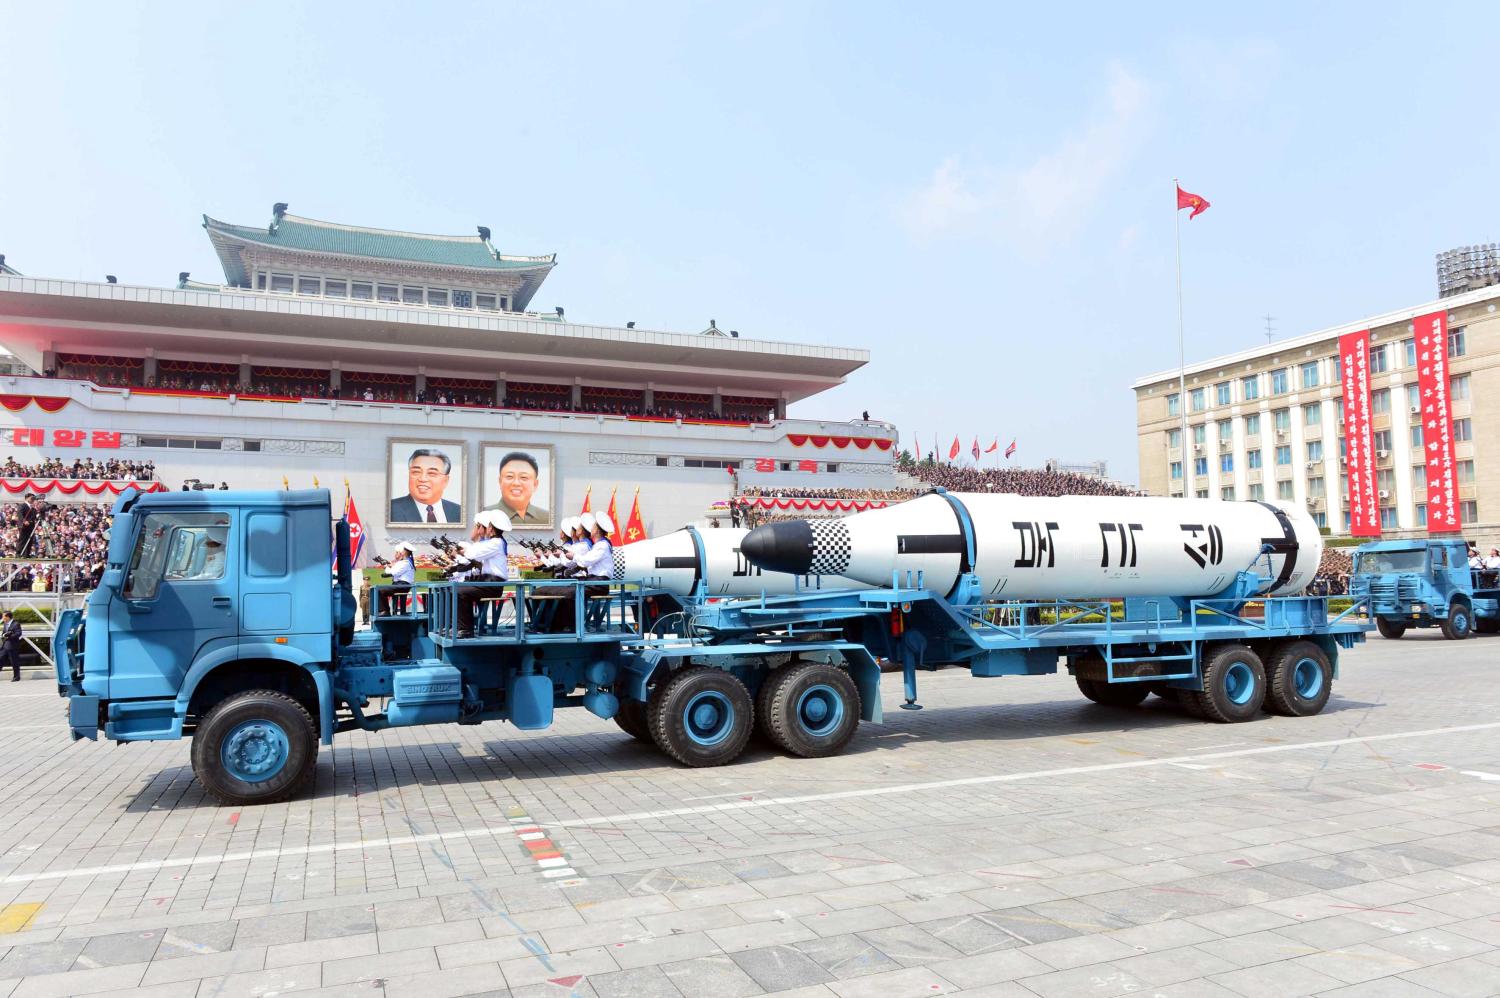 Military vehicles carry missiles with characters reading "Pukkuksong" during a military parade marking the 105th birth anniversary of country's founding father Kim Il Sung, in this undated photo, released by North Korea's Korean Central News Agency (KCNA), April 16, 2017. Picture taken April 16, 2017. KCNA/via REUTERS ATTENTION EDITORS - THIS PICTURE WAS PROVIDED BY A THIRD PARTY. REUTERS IS UNABLE TO INDEPENDENTLY VERIFY THE AUTHENTICITY, CONTENT, LOCATION OR DATE OF THIS IMAGE. FOR EDITORIAL USE ONLY. NOT FOR SALE FOR MARKETING OR ADVERTISING CAMPAIGNS. NO THIRD PARTY SALES. NOT FOR USE BY REUTERS THIRD PARTY DISTRIBUTORS. SOUTH KOREA OUT. NO COMMERCIAL OR EDITORIAL SALES IN SOUTH KOREA. THIS PICTURE IS DISTRIBUTED EXACTLY AS RECEIVED BY REUTERS, AS A SERVICE TO CLIENTS. - RTS12PR7